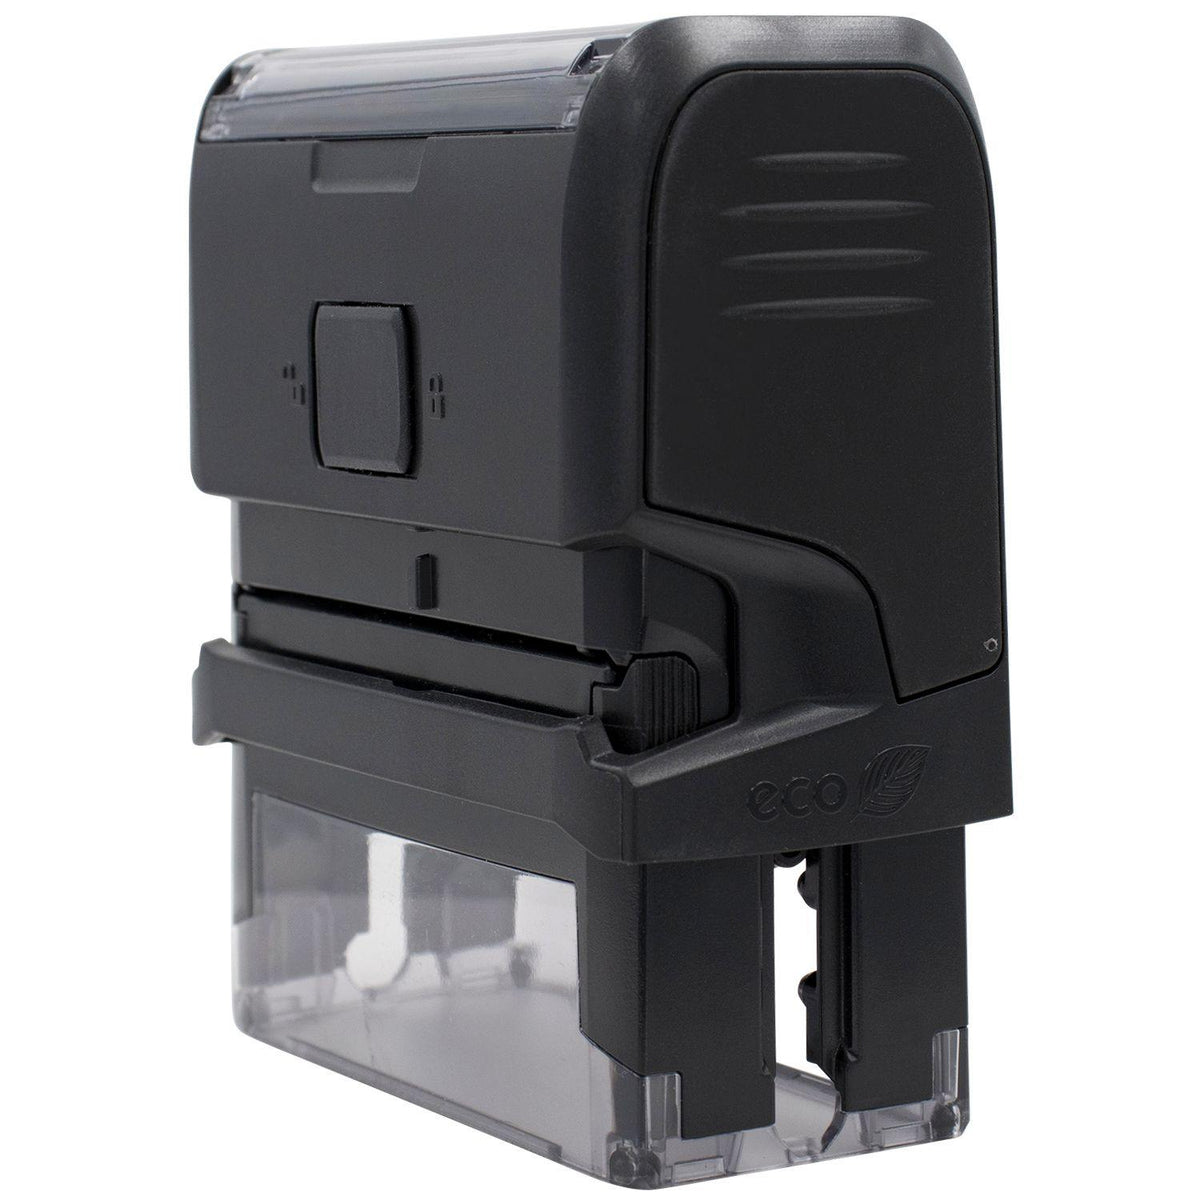 Self-Inking Barcode Confidential Stamp - Engineer Seal Stamps - Brand_Trodat, Impression Size_Small, Stamp Type_Self-Inking Stamp, Type of Use_Finance, Type of Use_Legal, Type of Use_Office